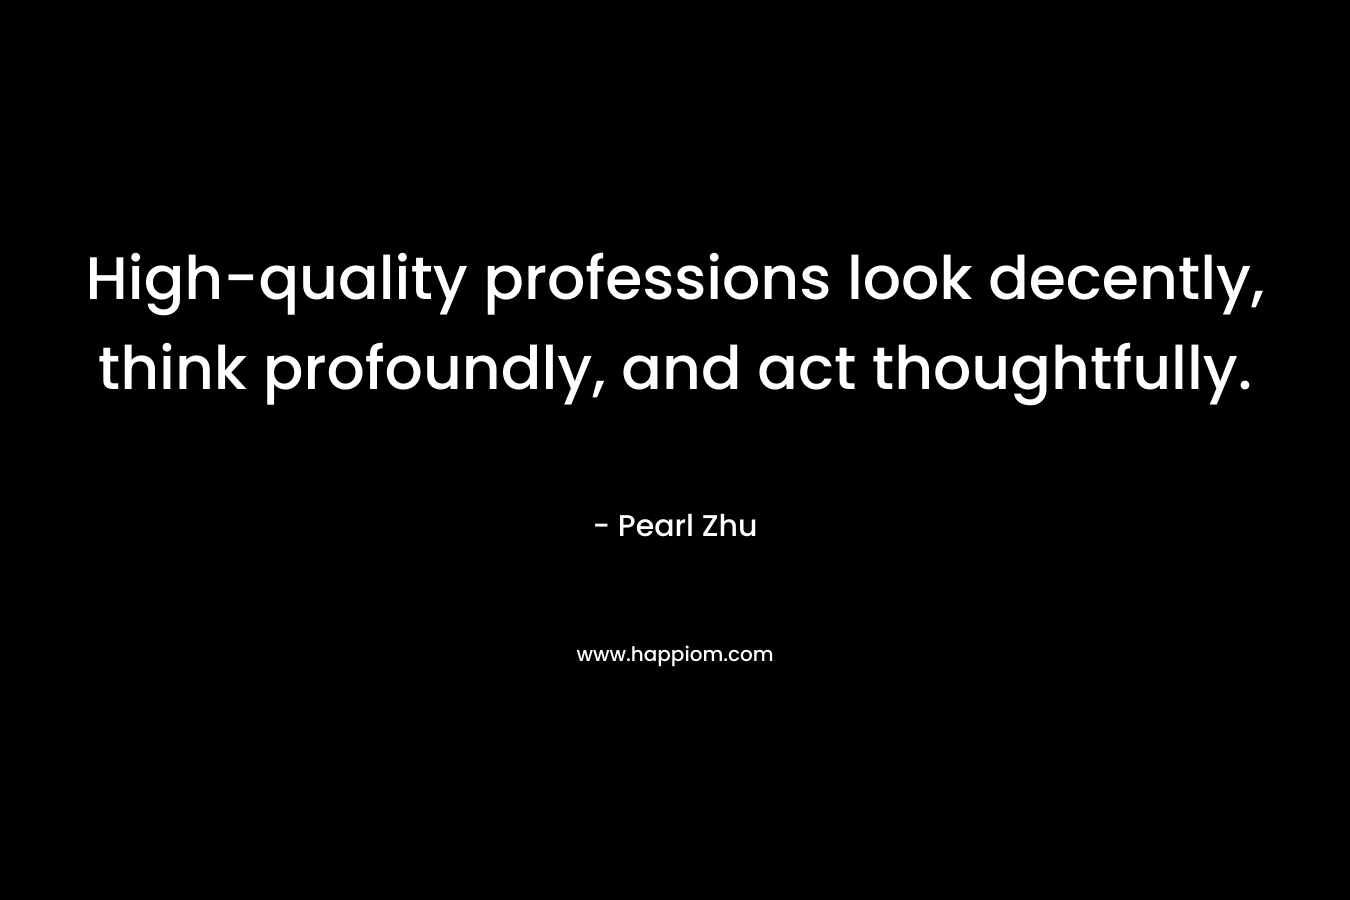 High-quality professions look decently, think profoundly, and act thoughtfully. – Pearl Zhu